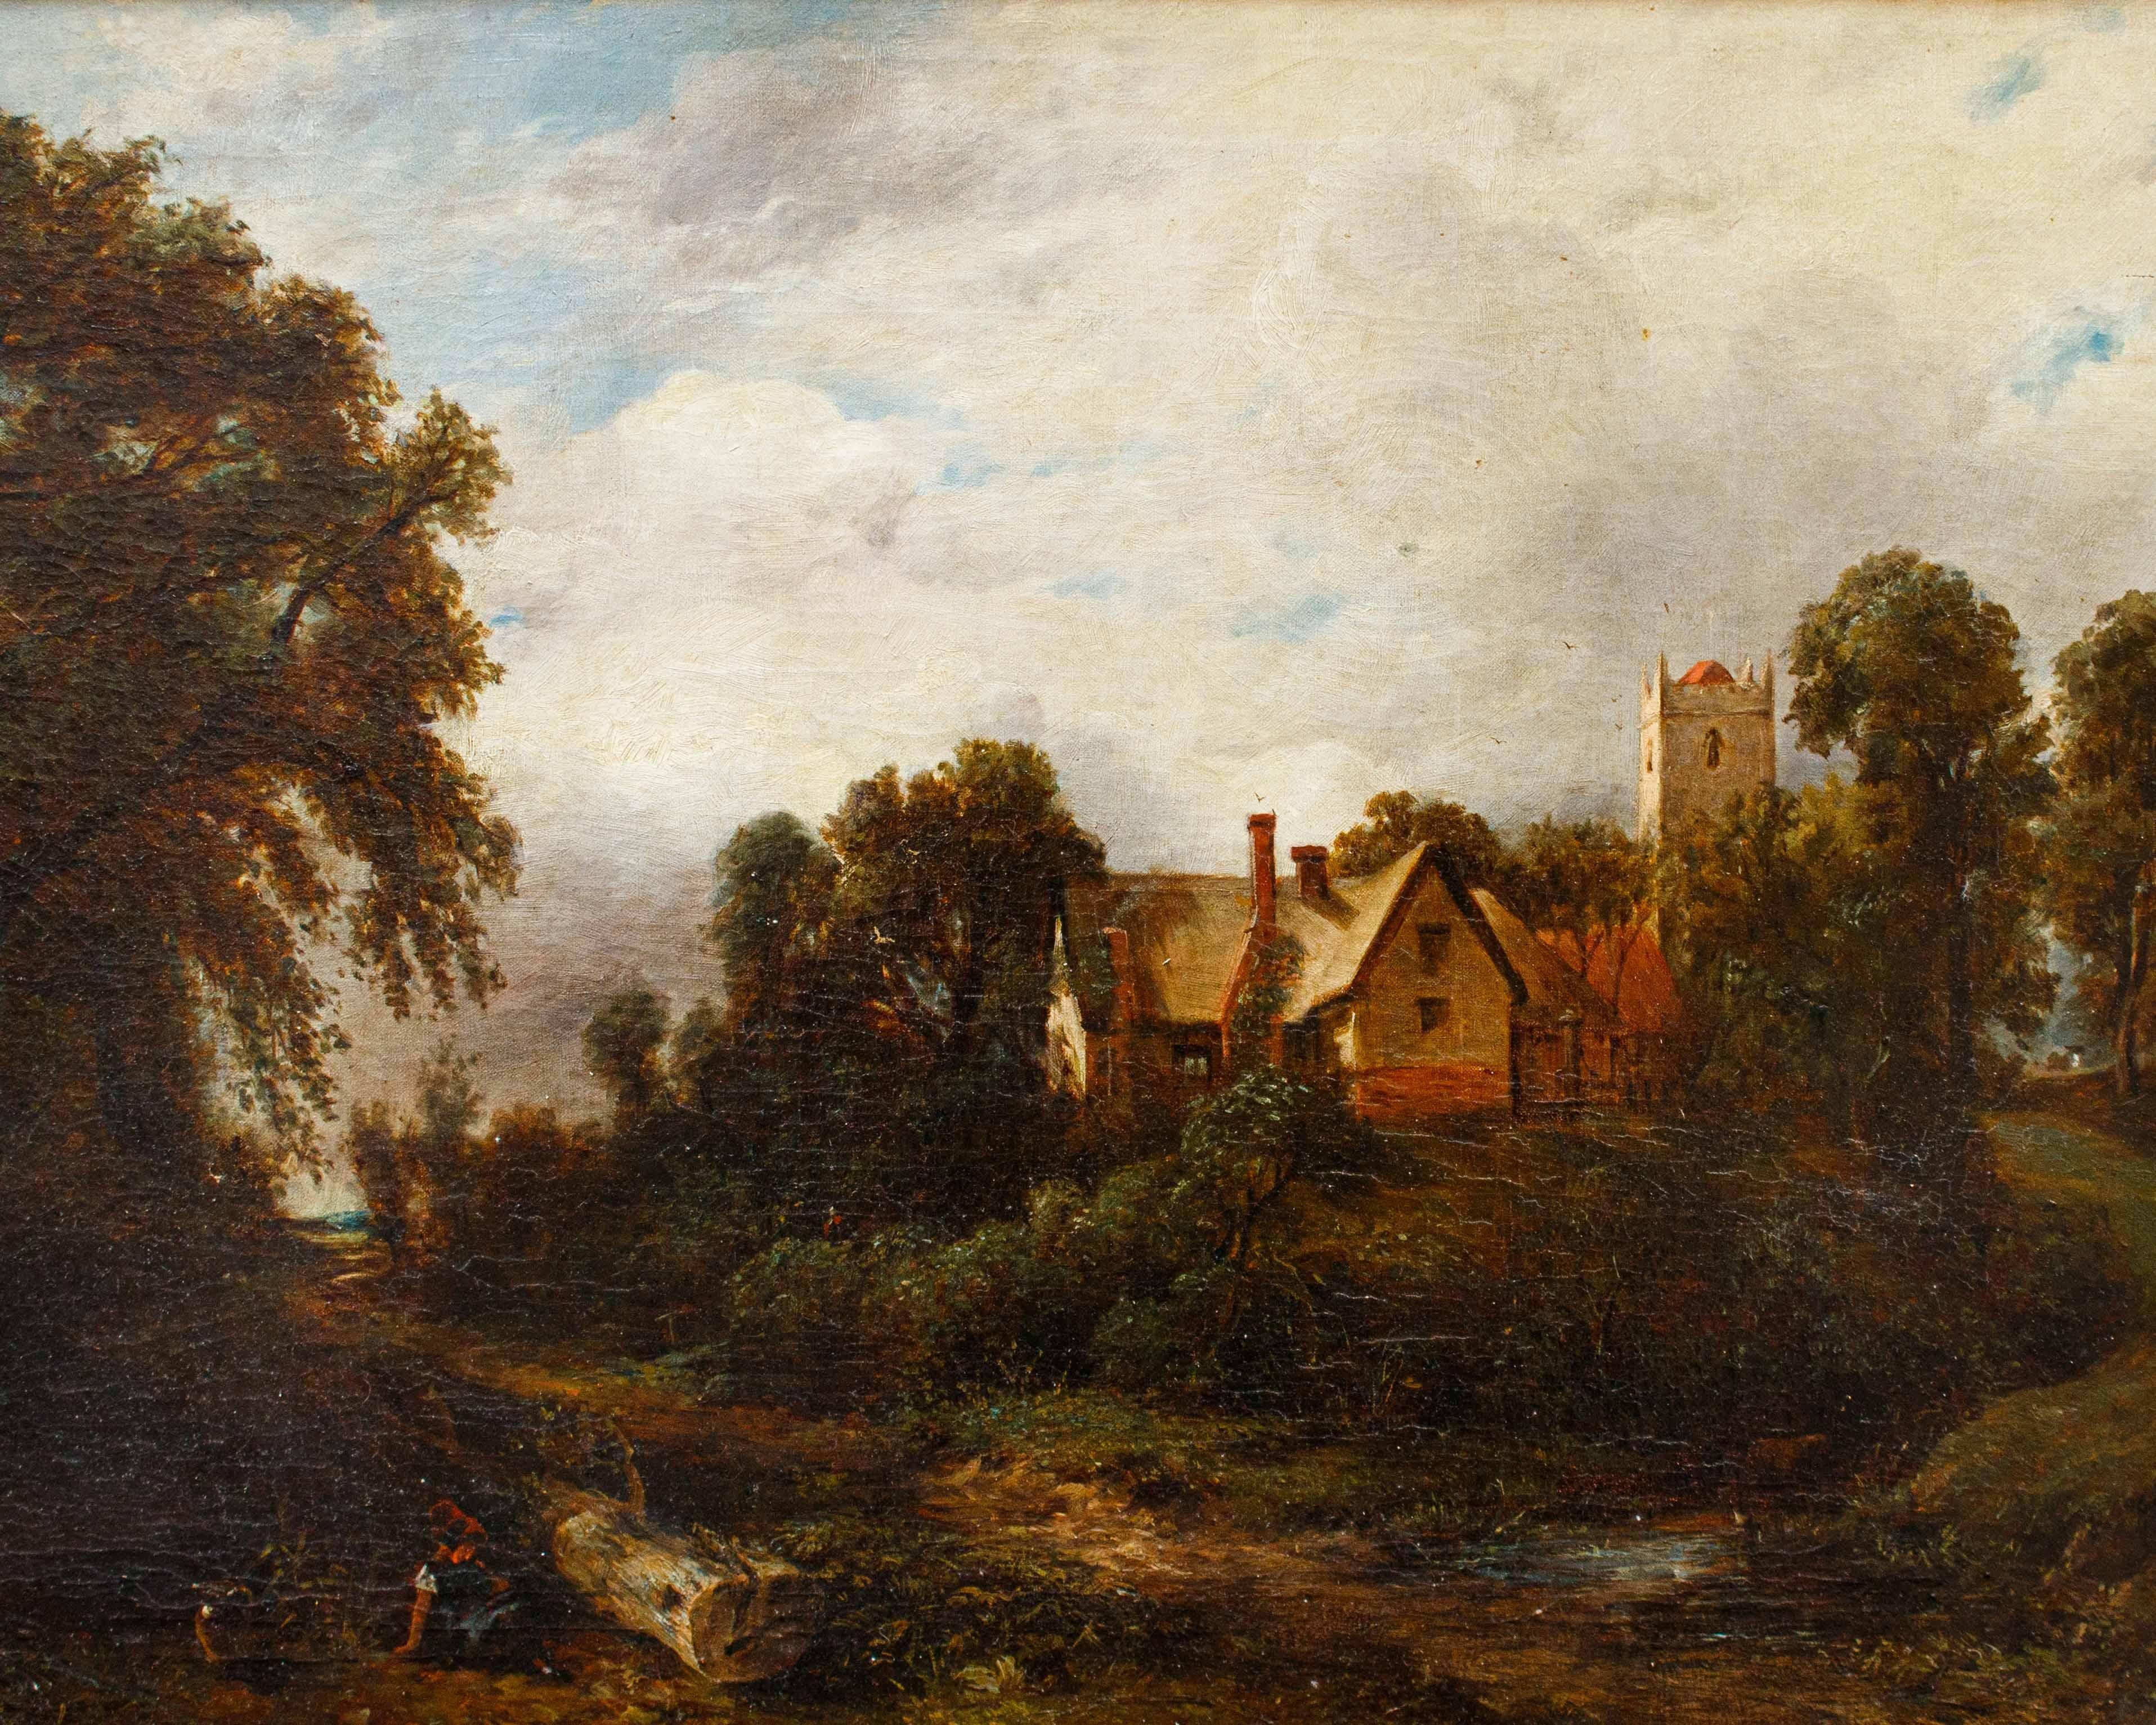 19th Century English Landscape Painting Oil on Canvas 6